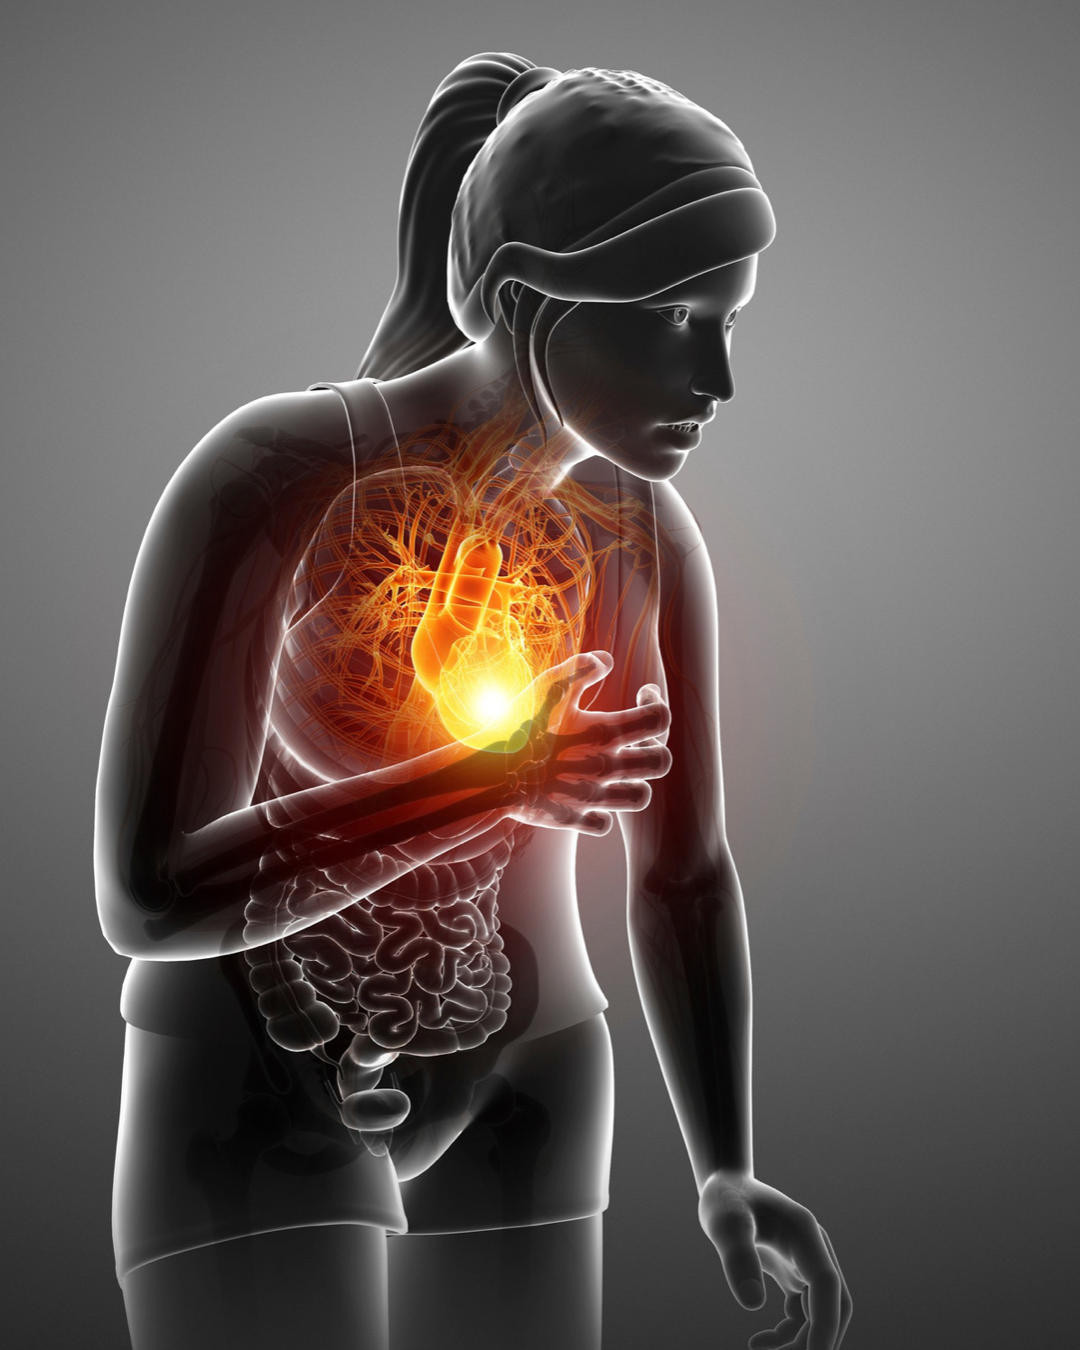 Heart Failure: Signs Your Heart May be Failing